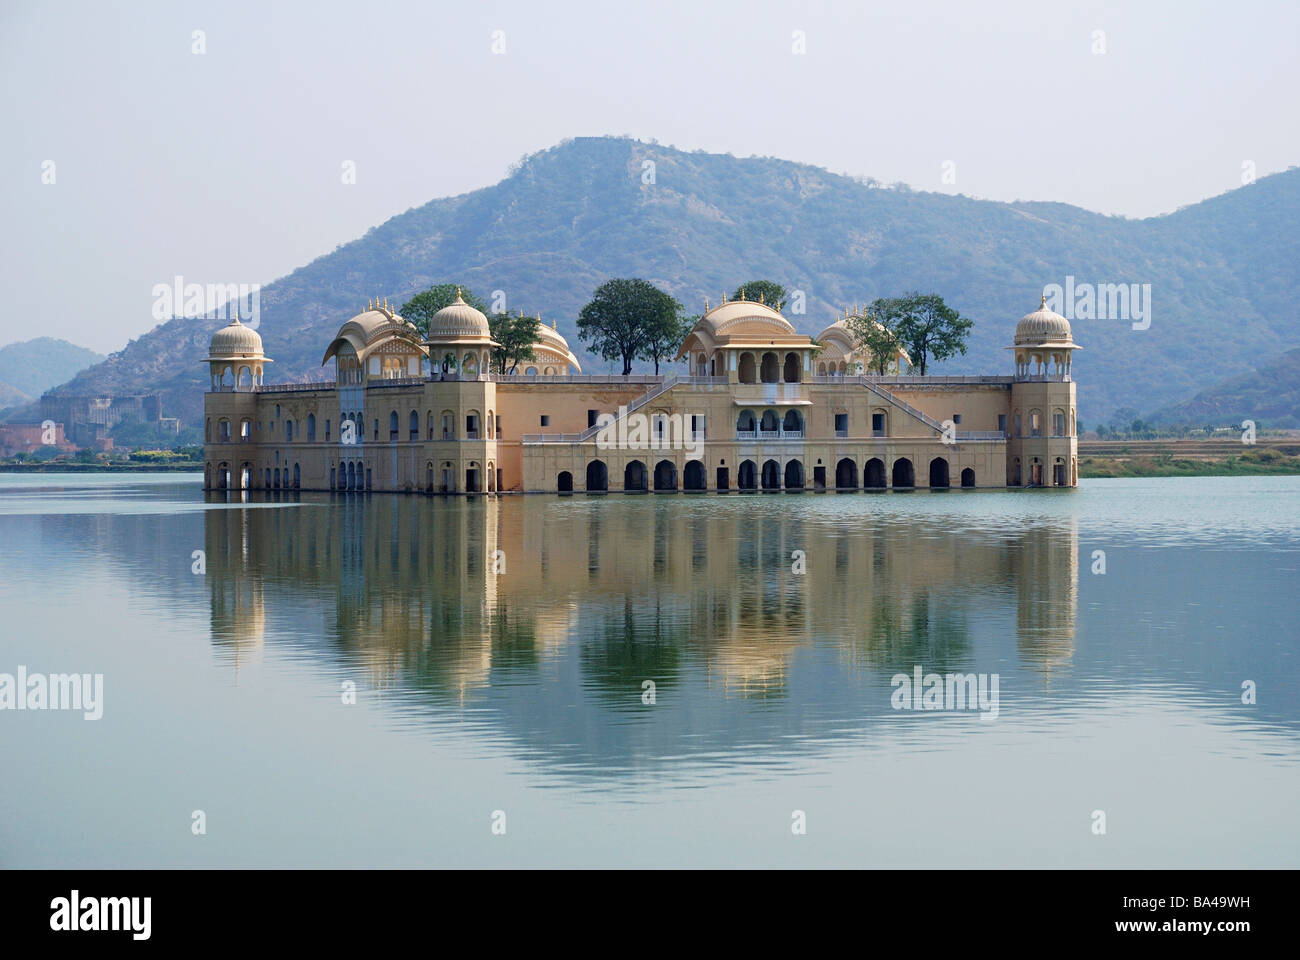 Jal Mahal Palace Palace Located In The Middle Of The Man Sagar Lake Stock Photo Alamy